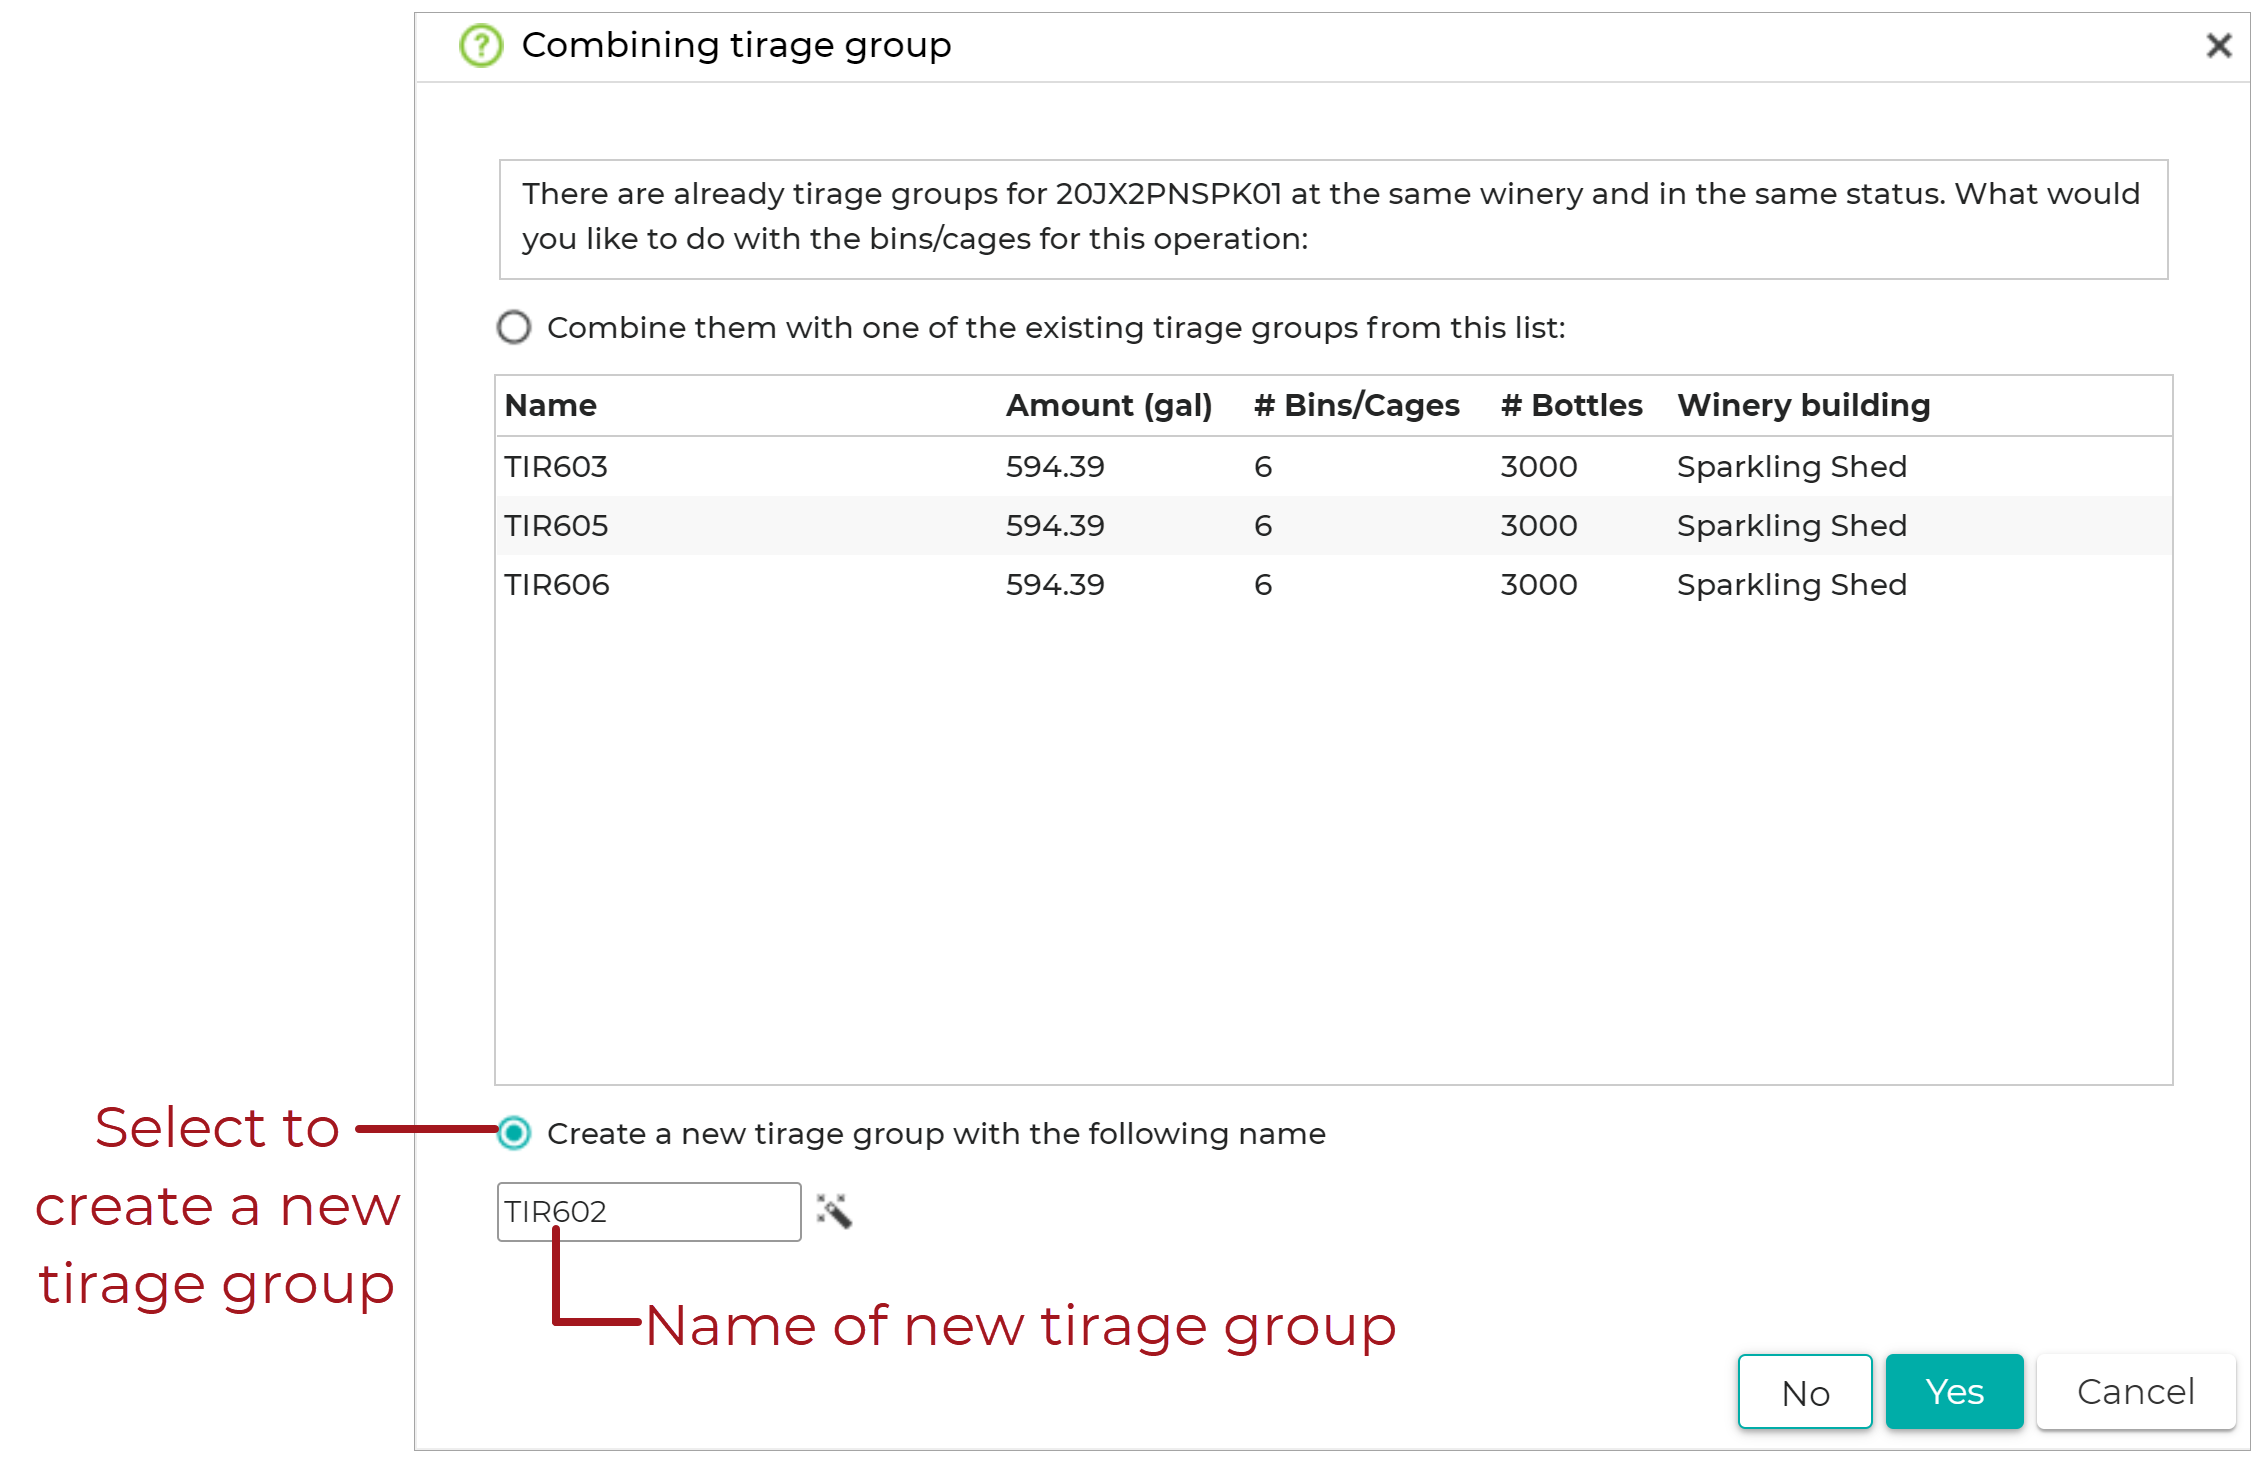 Combining_Tirage_Group_-_Create_New_TIrage_Group_20210106.png